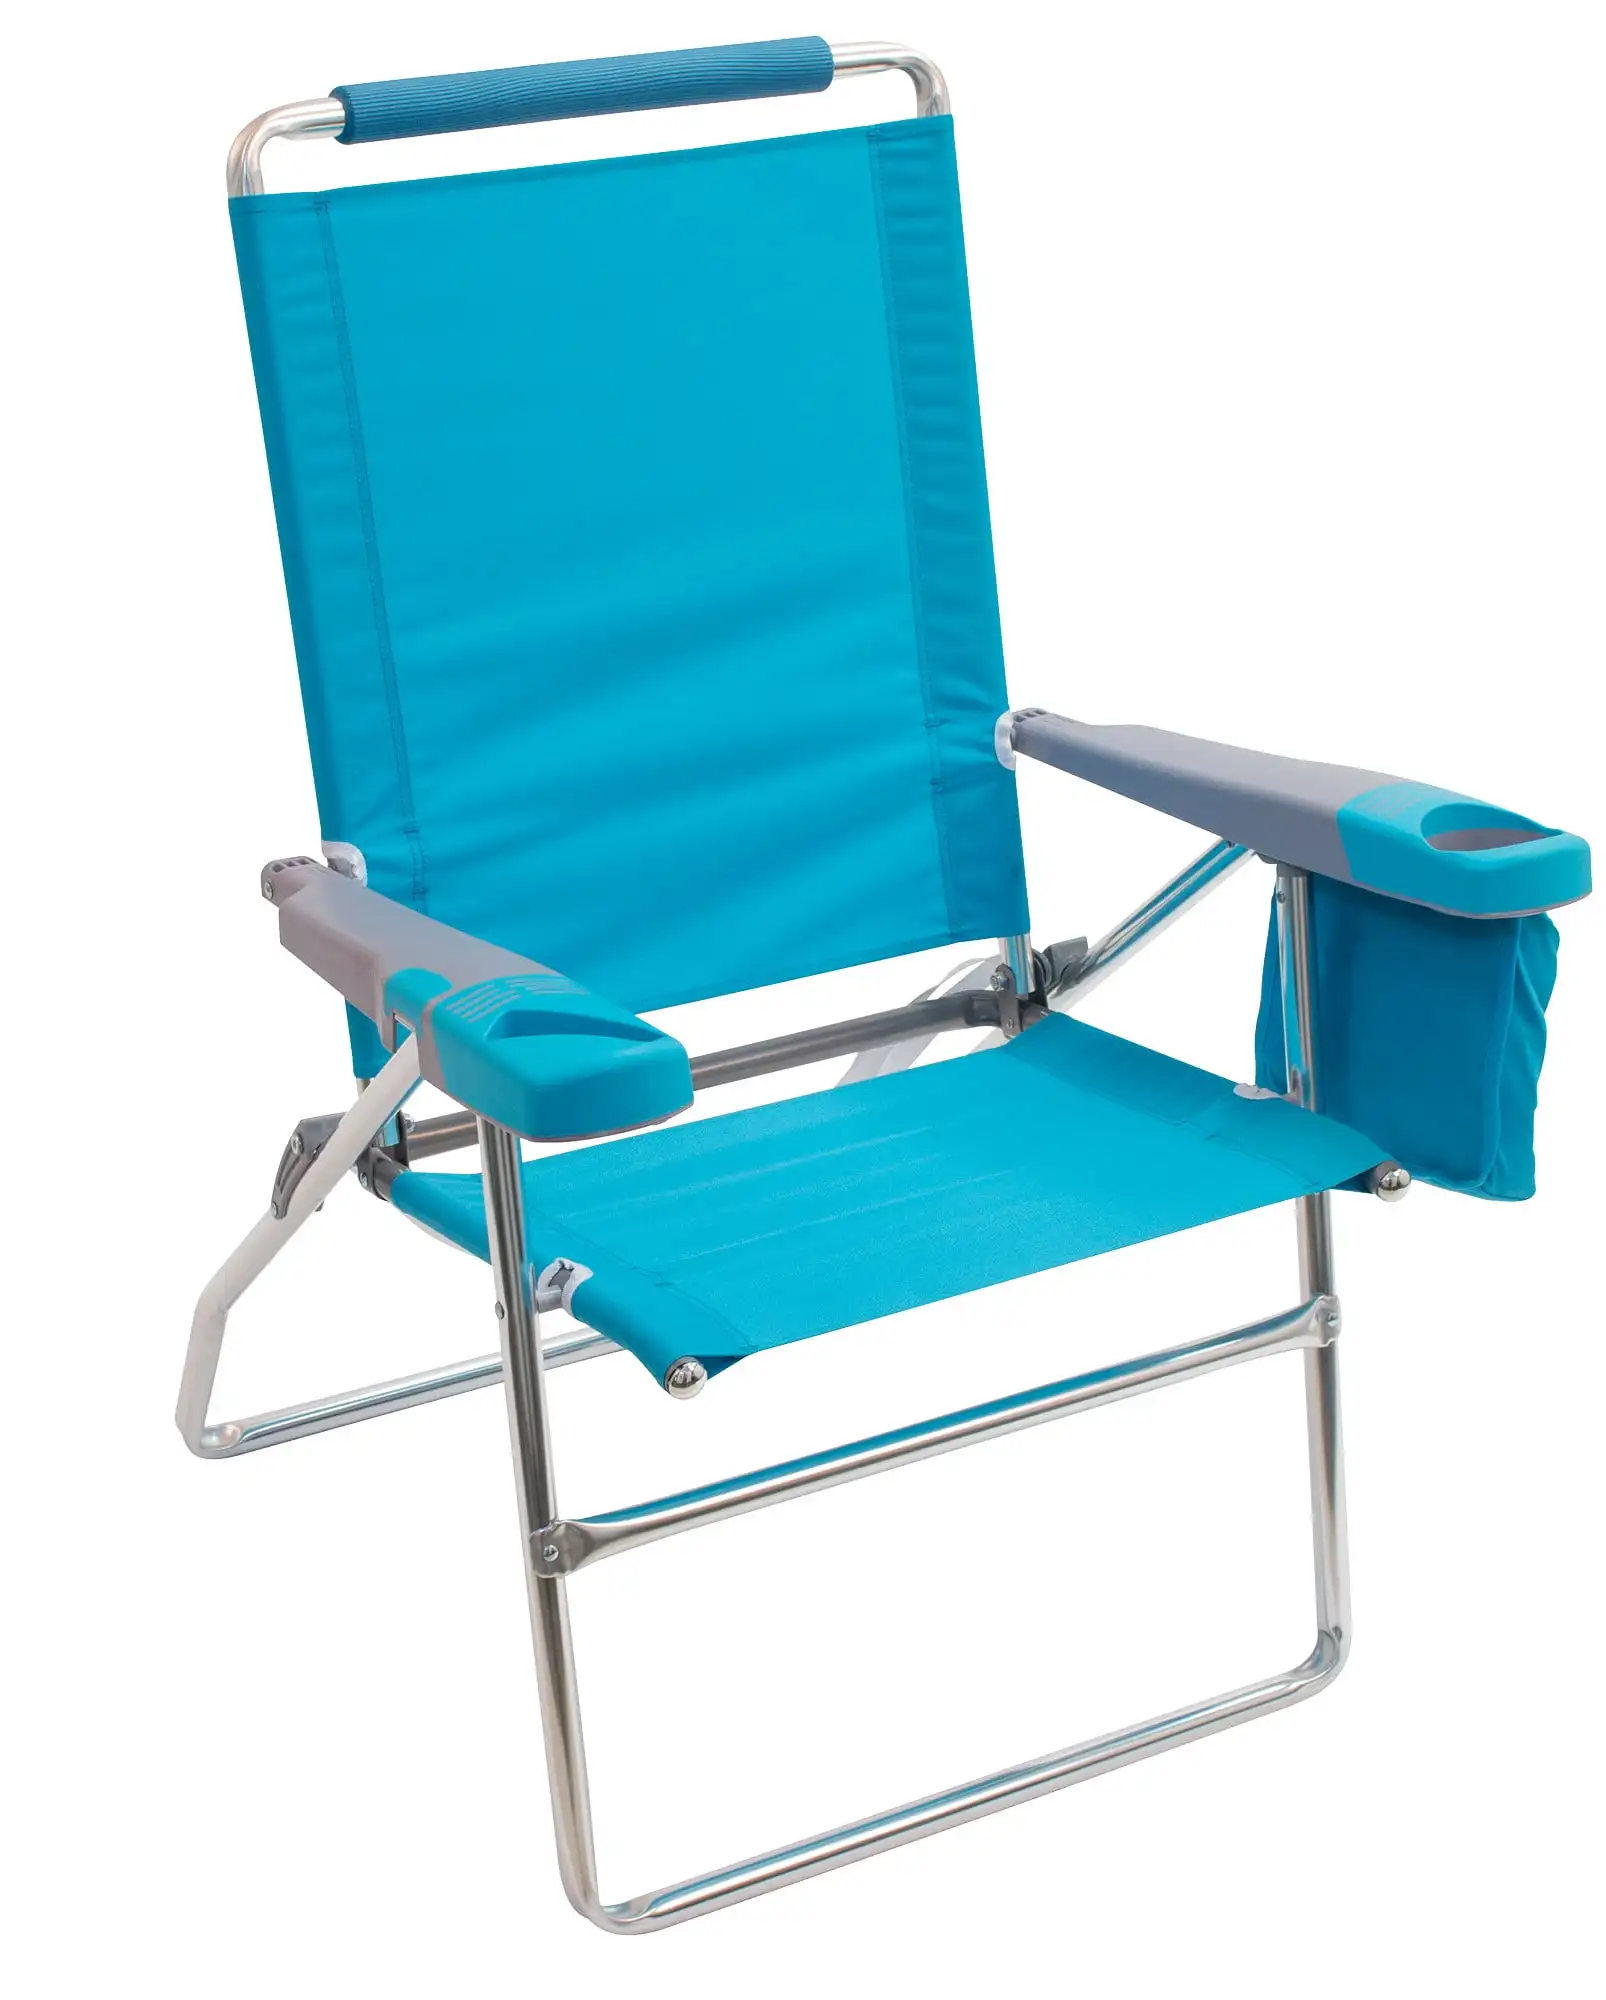 

17" Height Beach Chair 4 position Adjustable Chaise Lounge Outdoor Pool Side Folding Recliners